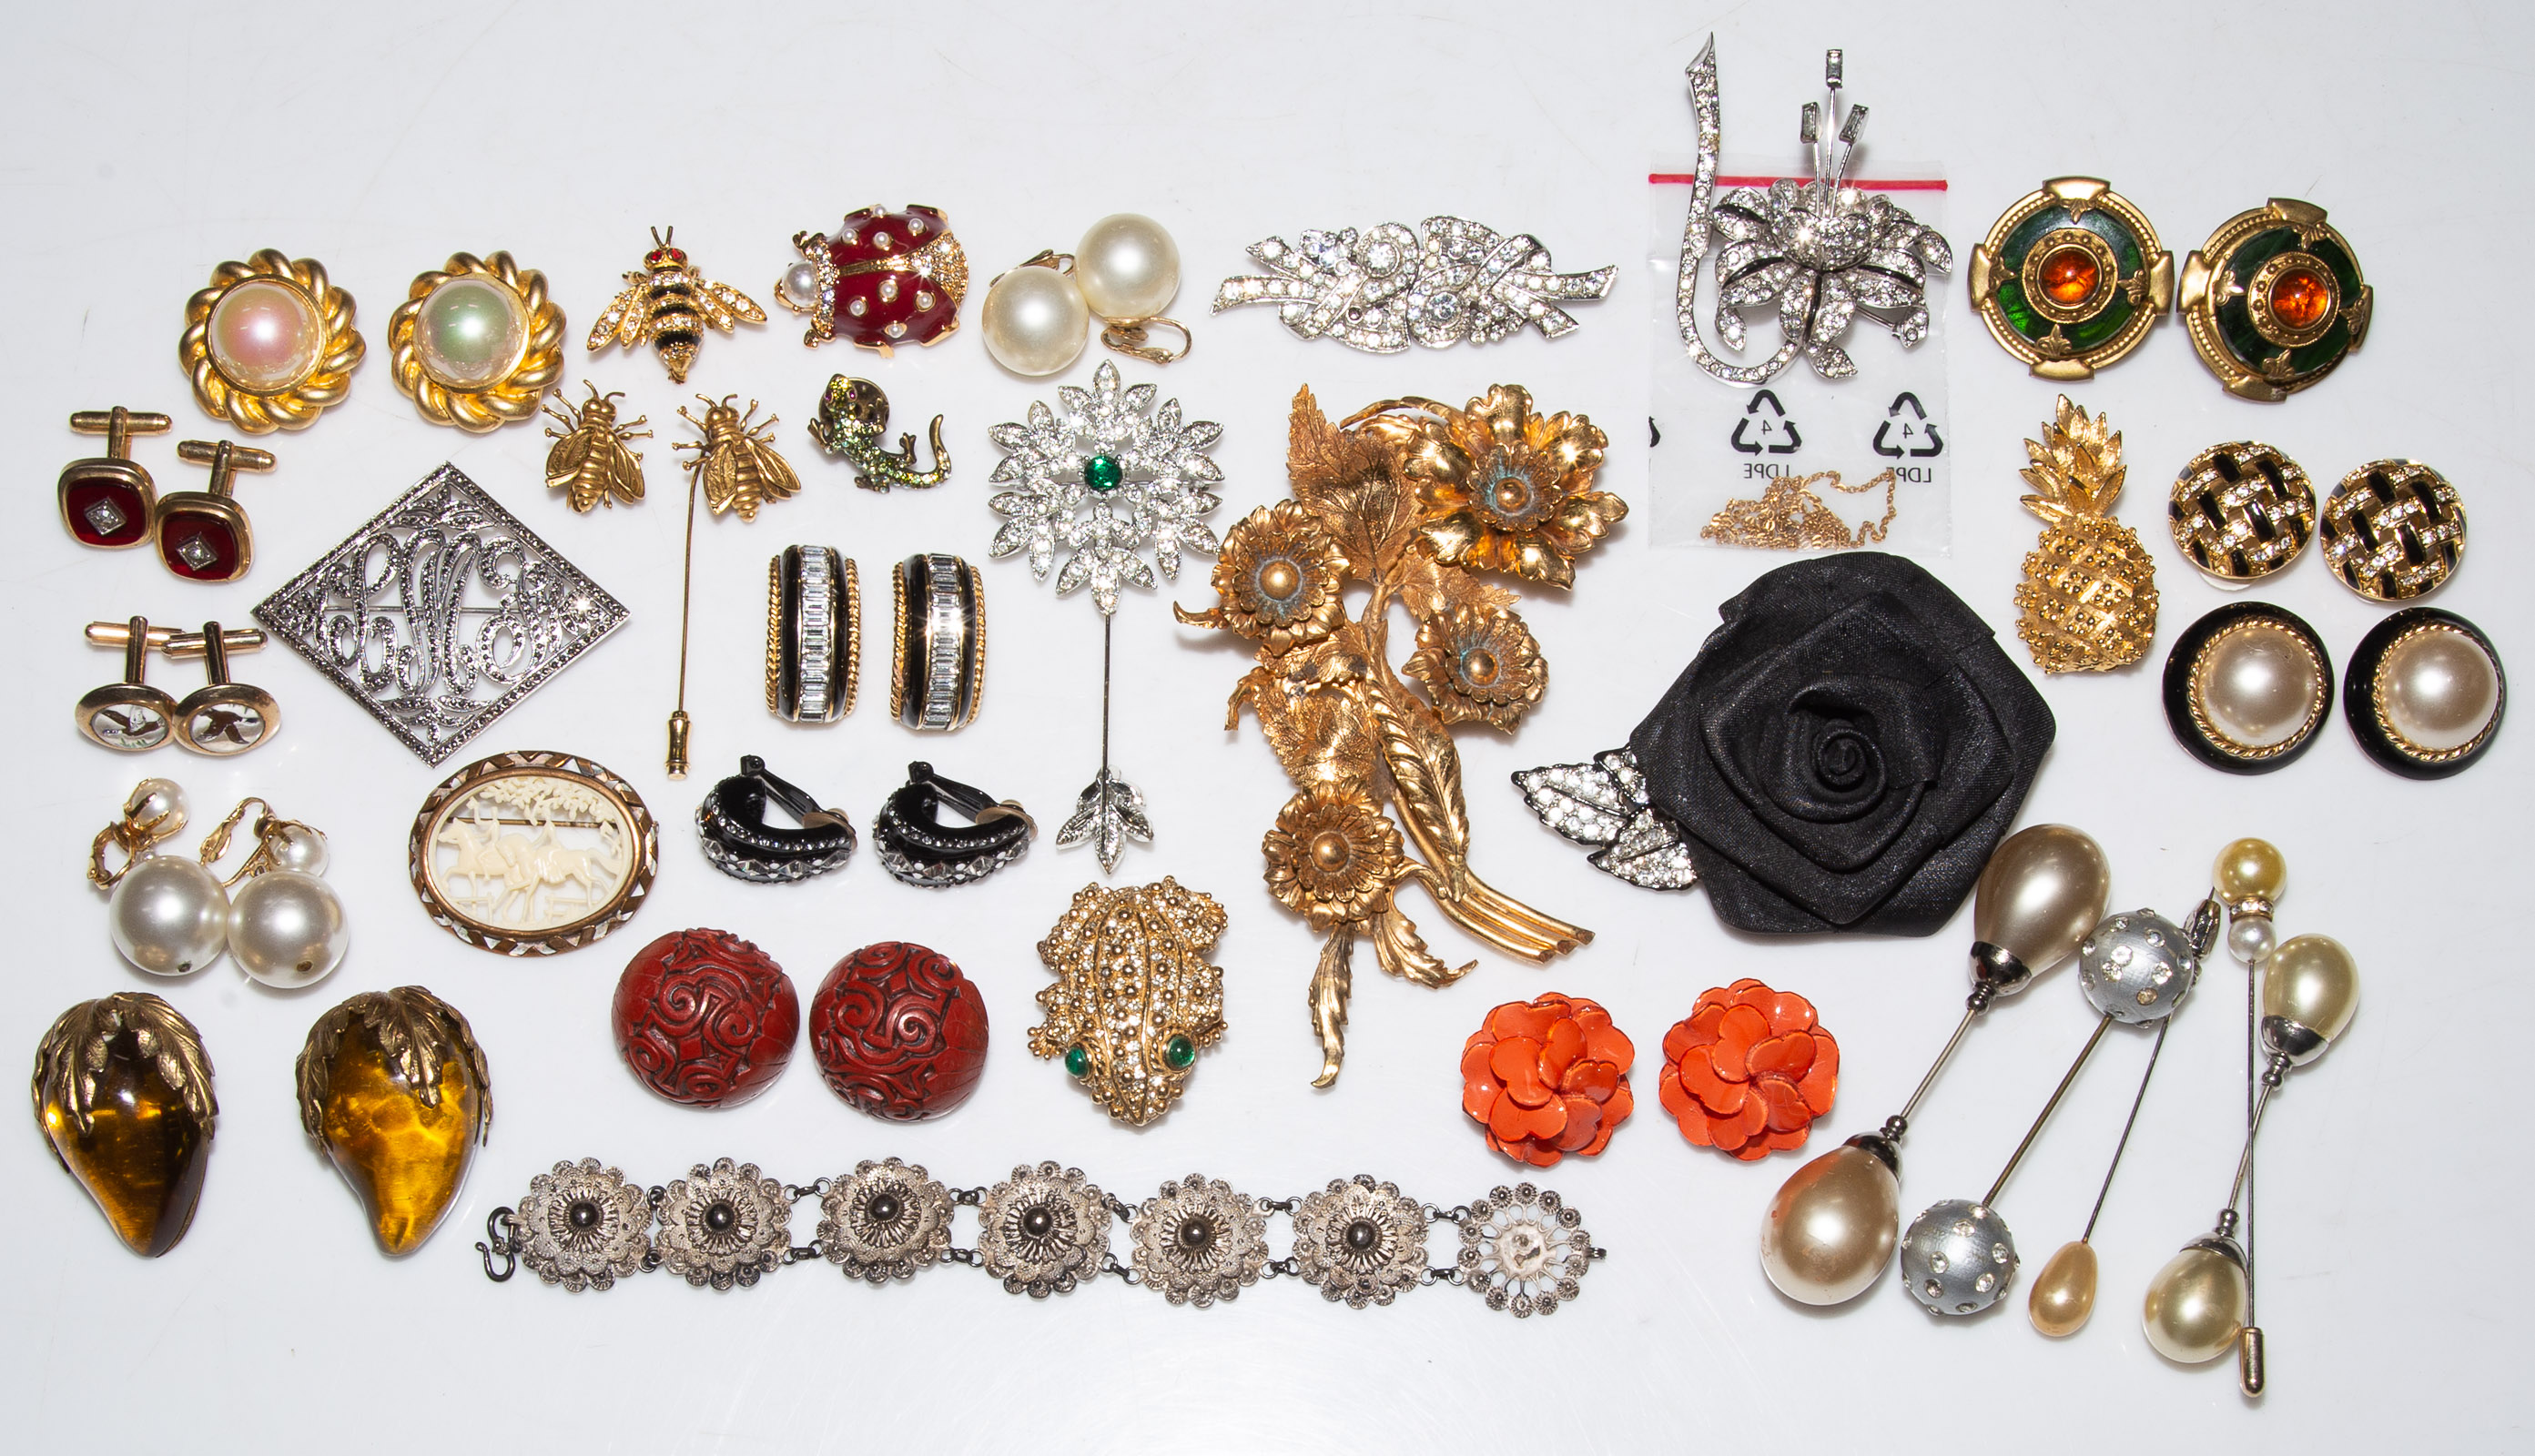 A COLLECTION OF VINTAGE JEWELRY